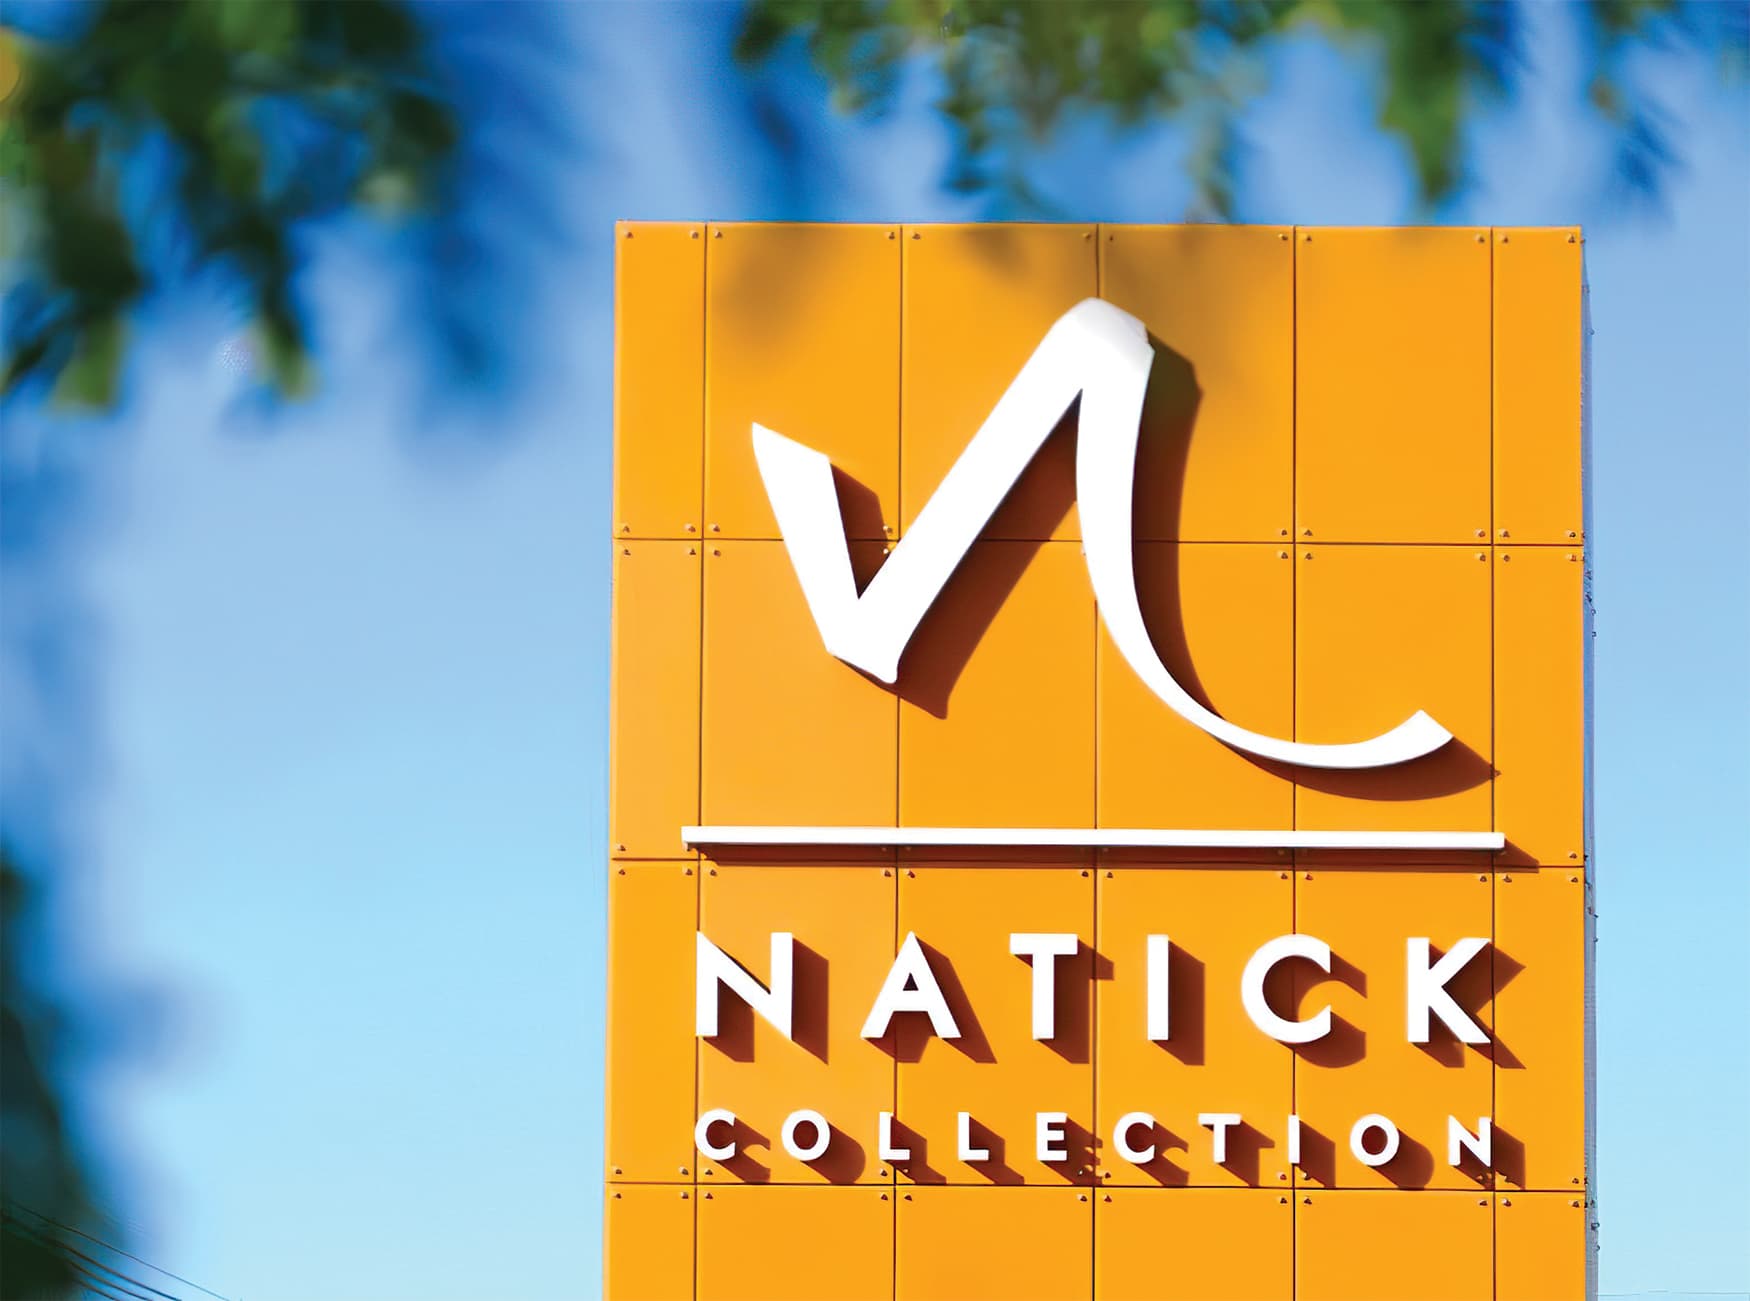 Natick Collection, New England's largest mixed-use retail destination, commissioned RSM Design to create a brand identity as well as a placemaking, identity, and wayfinding features. Project Identity Monument.